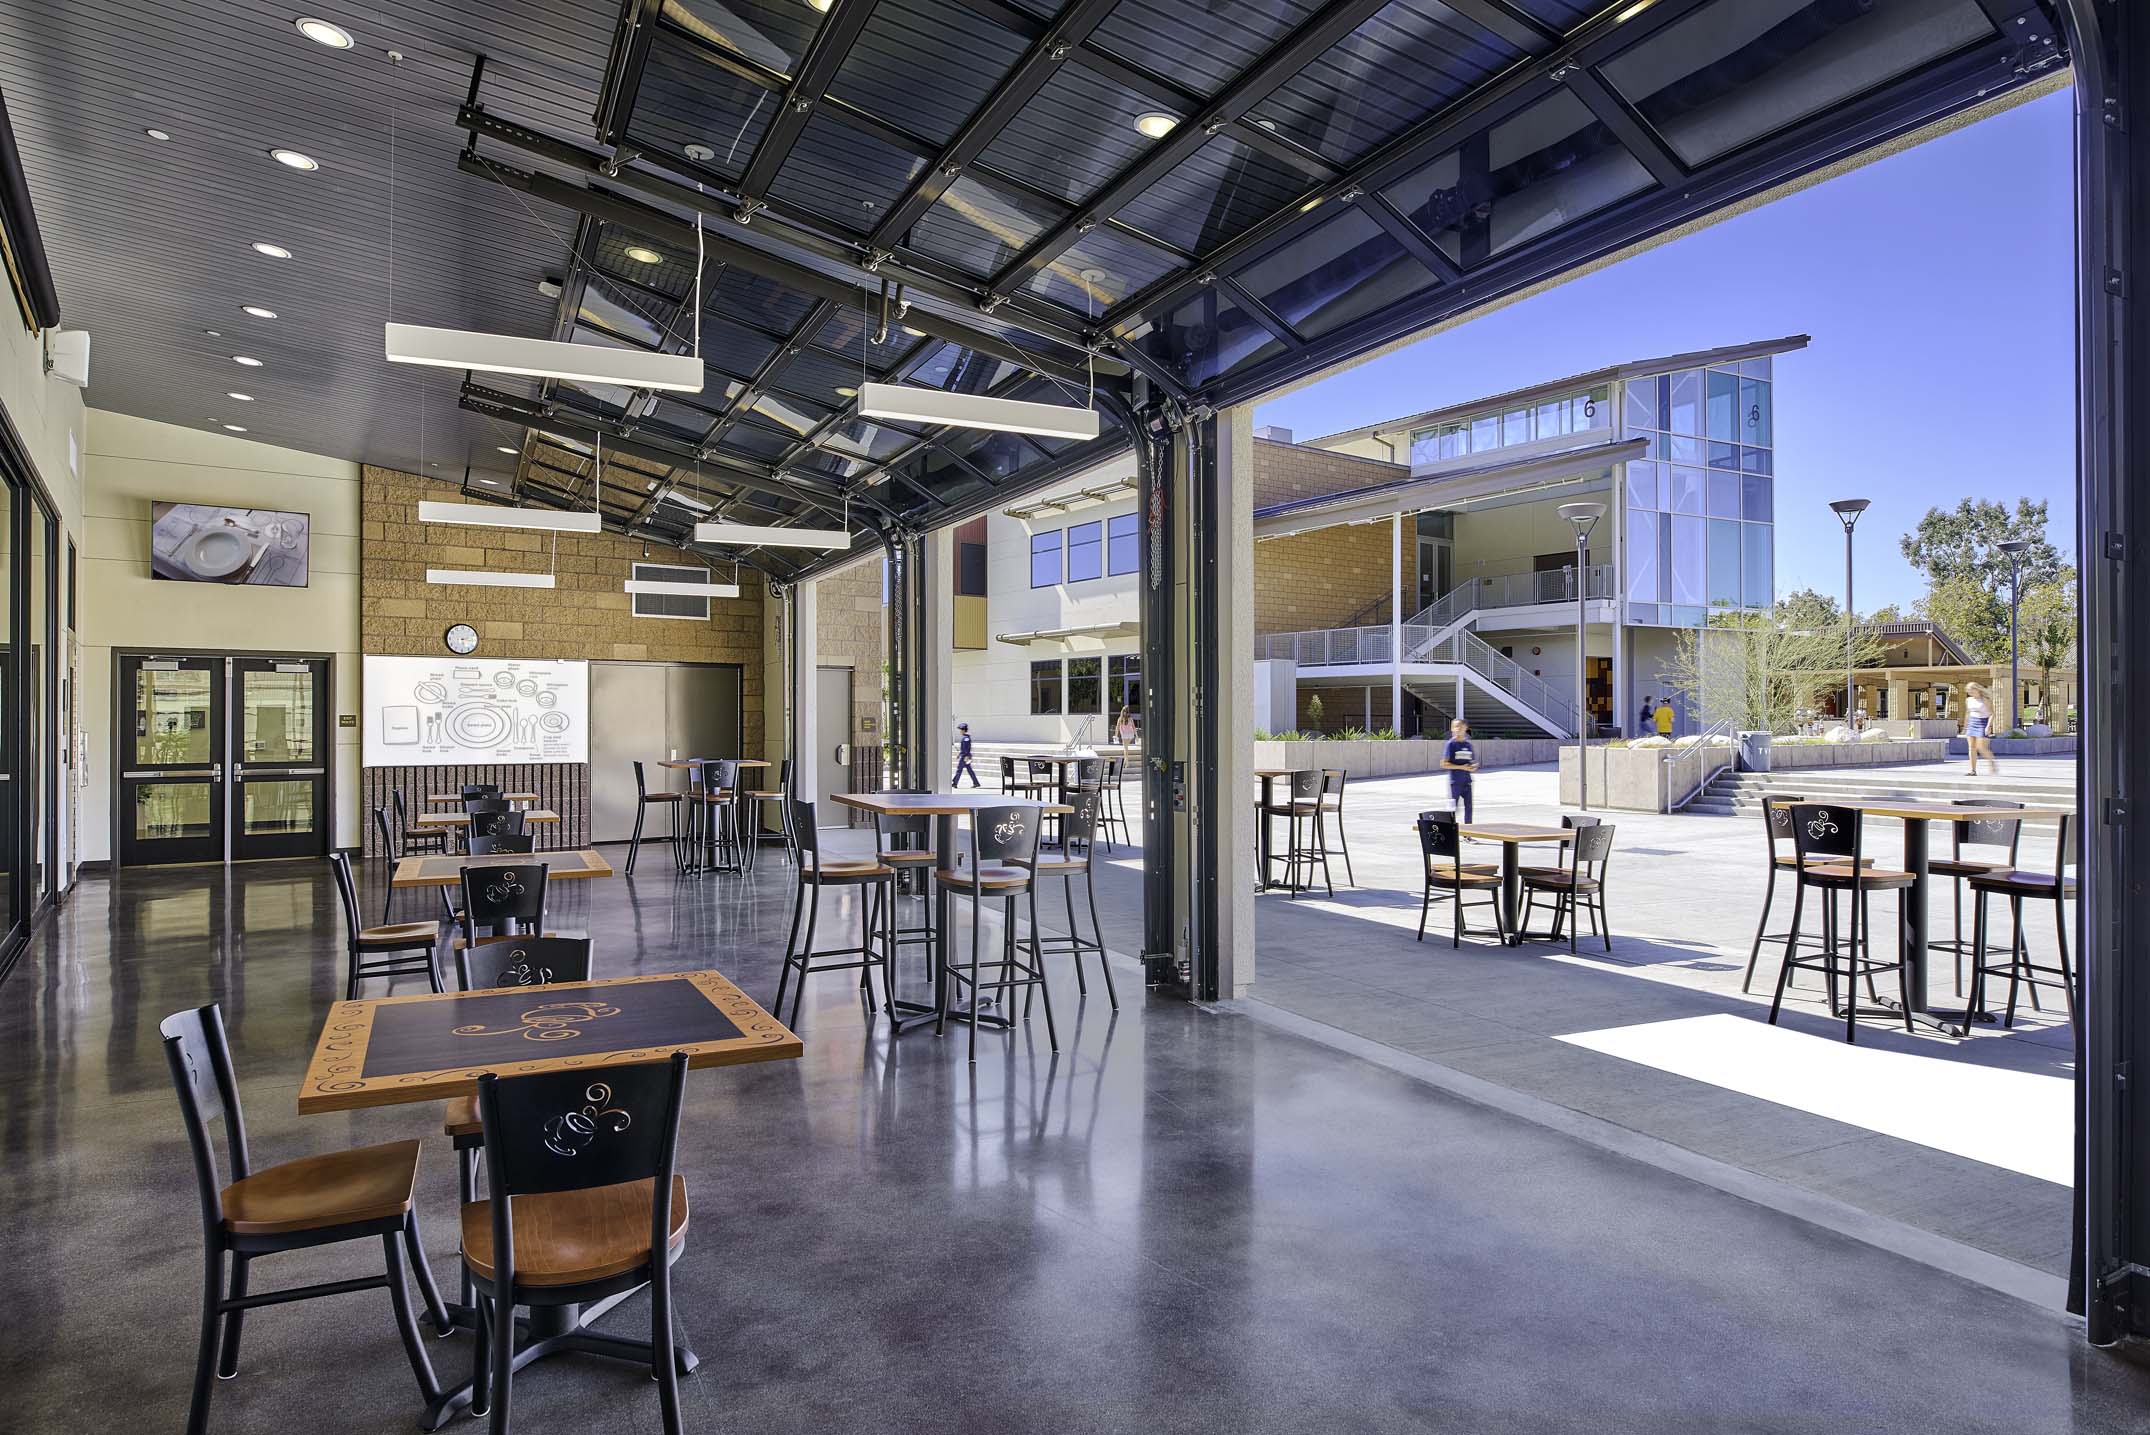 Indoor and outdoor eating area at Temecula Valley High School